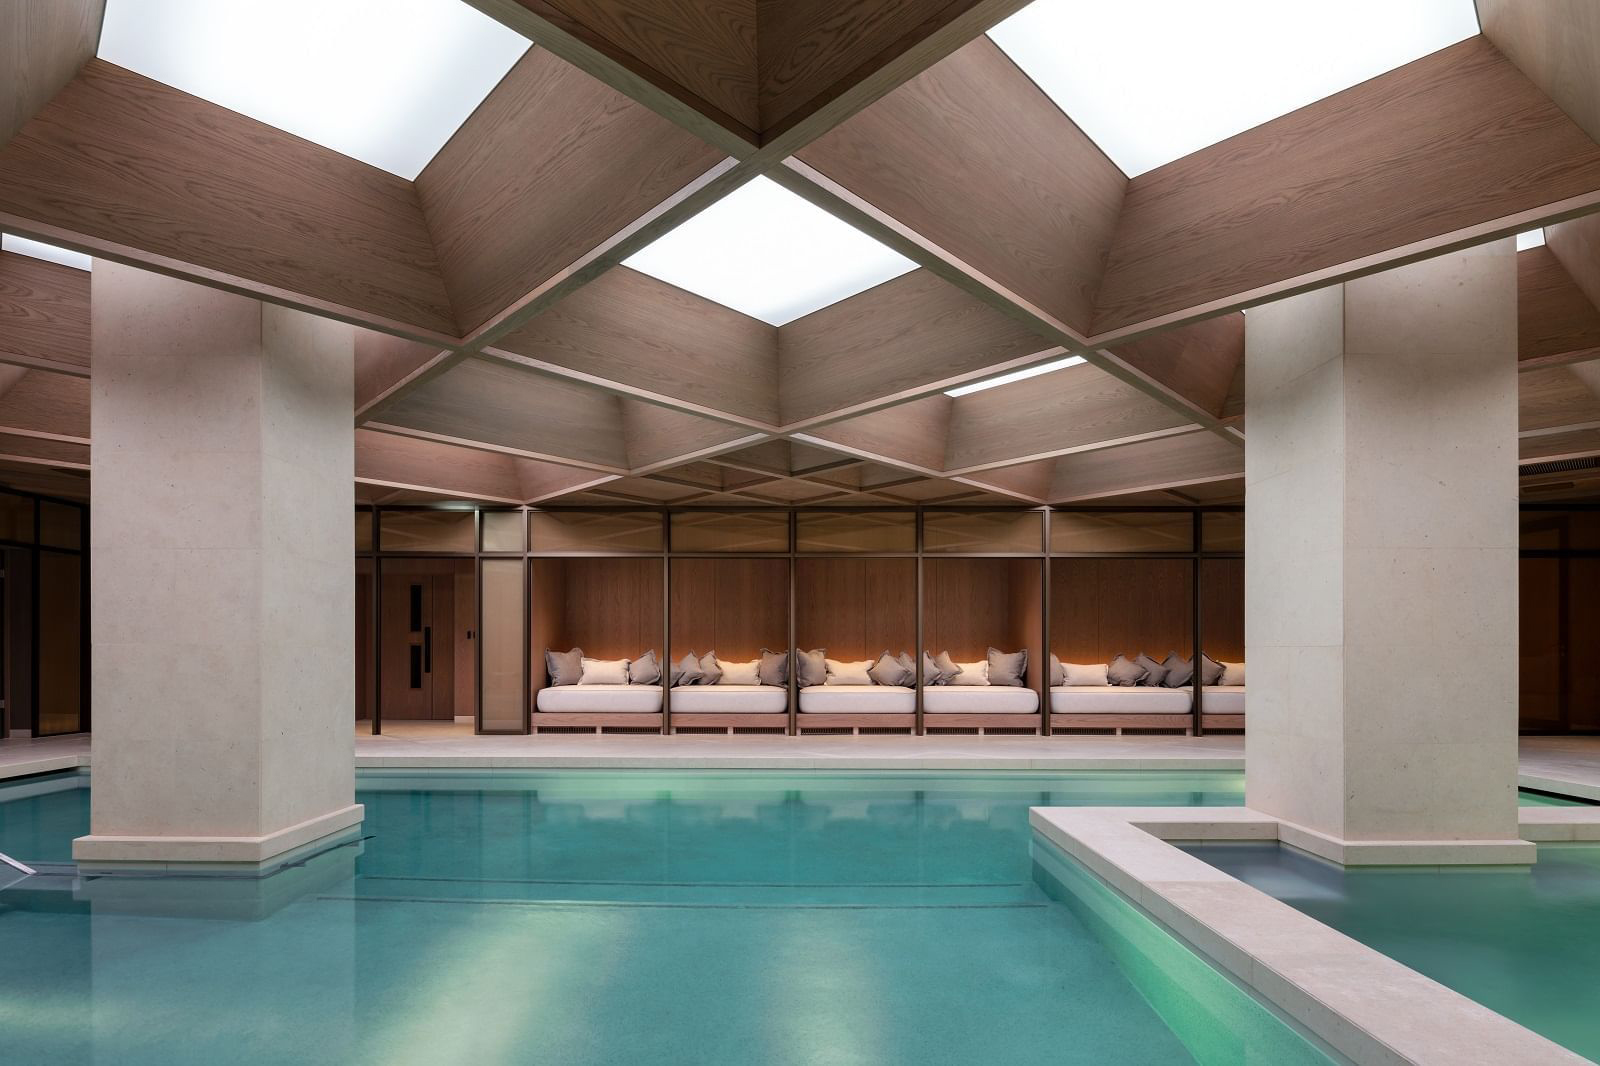 The pool at the Retreat at the Londoner